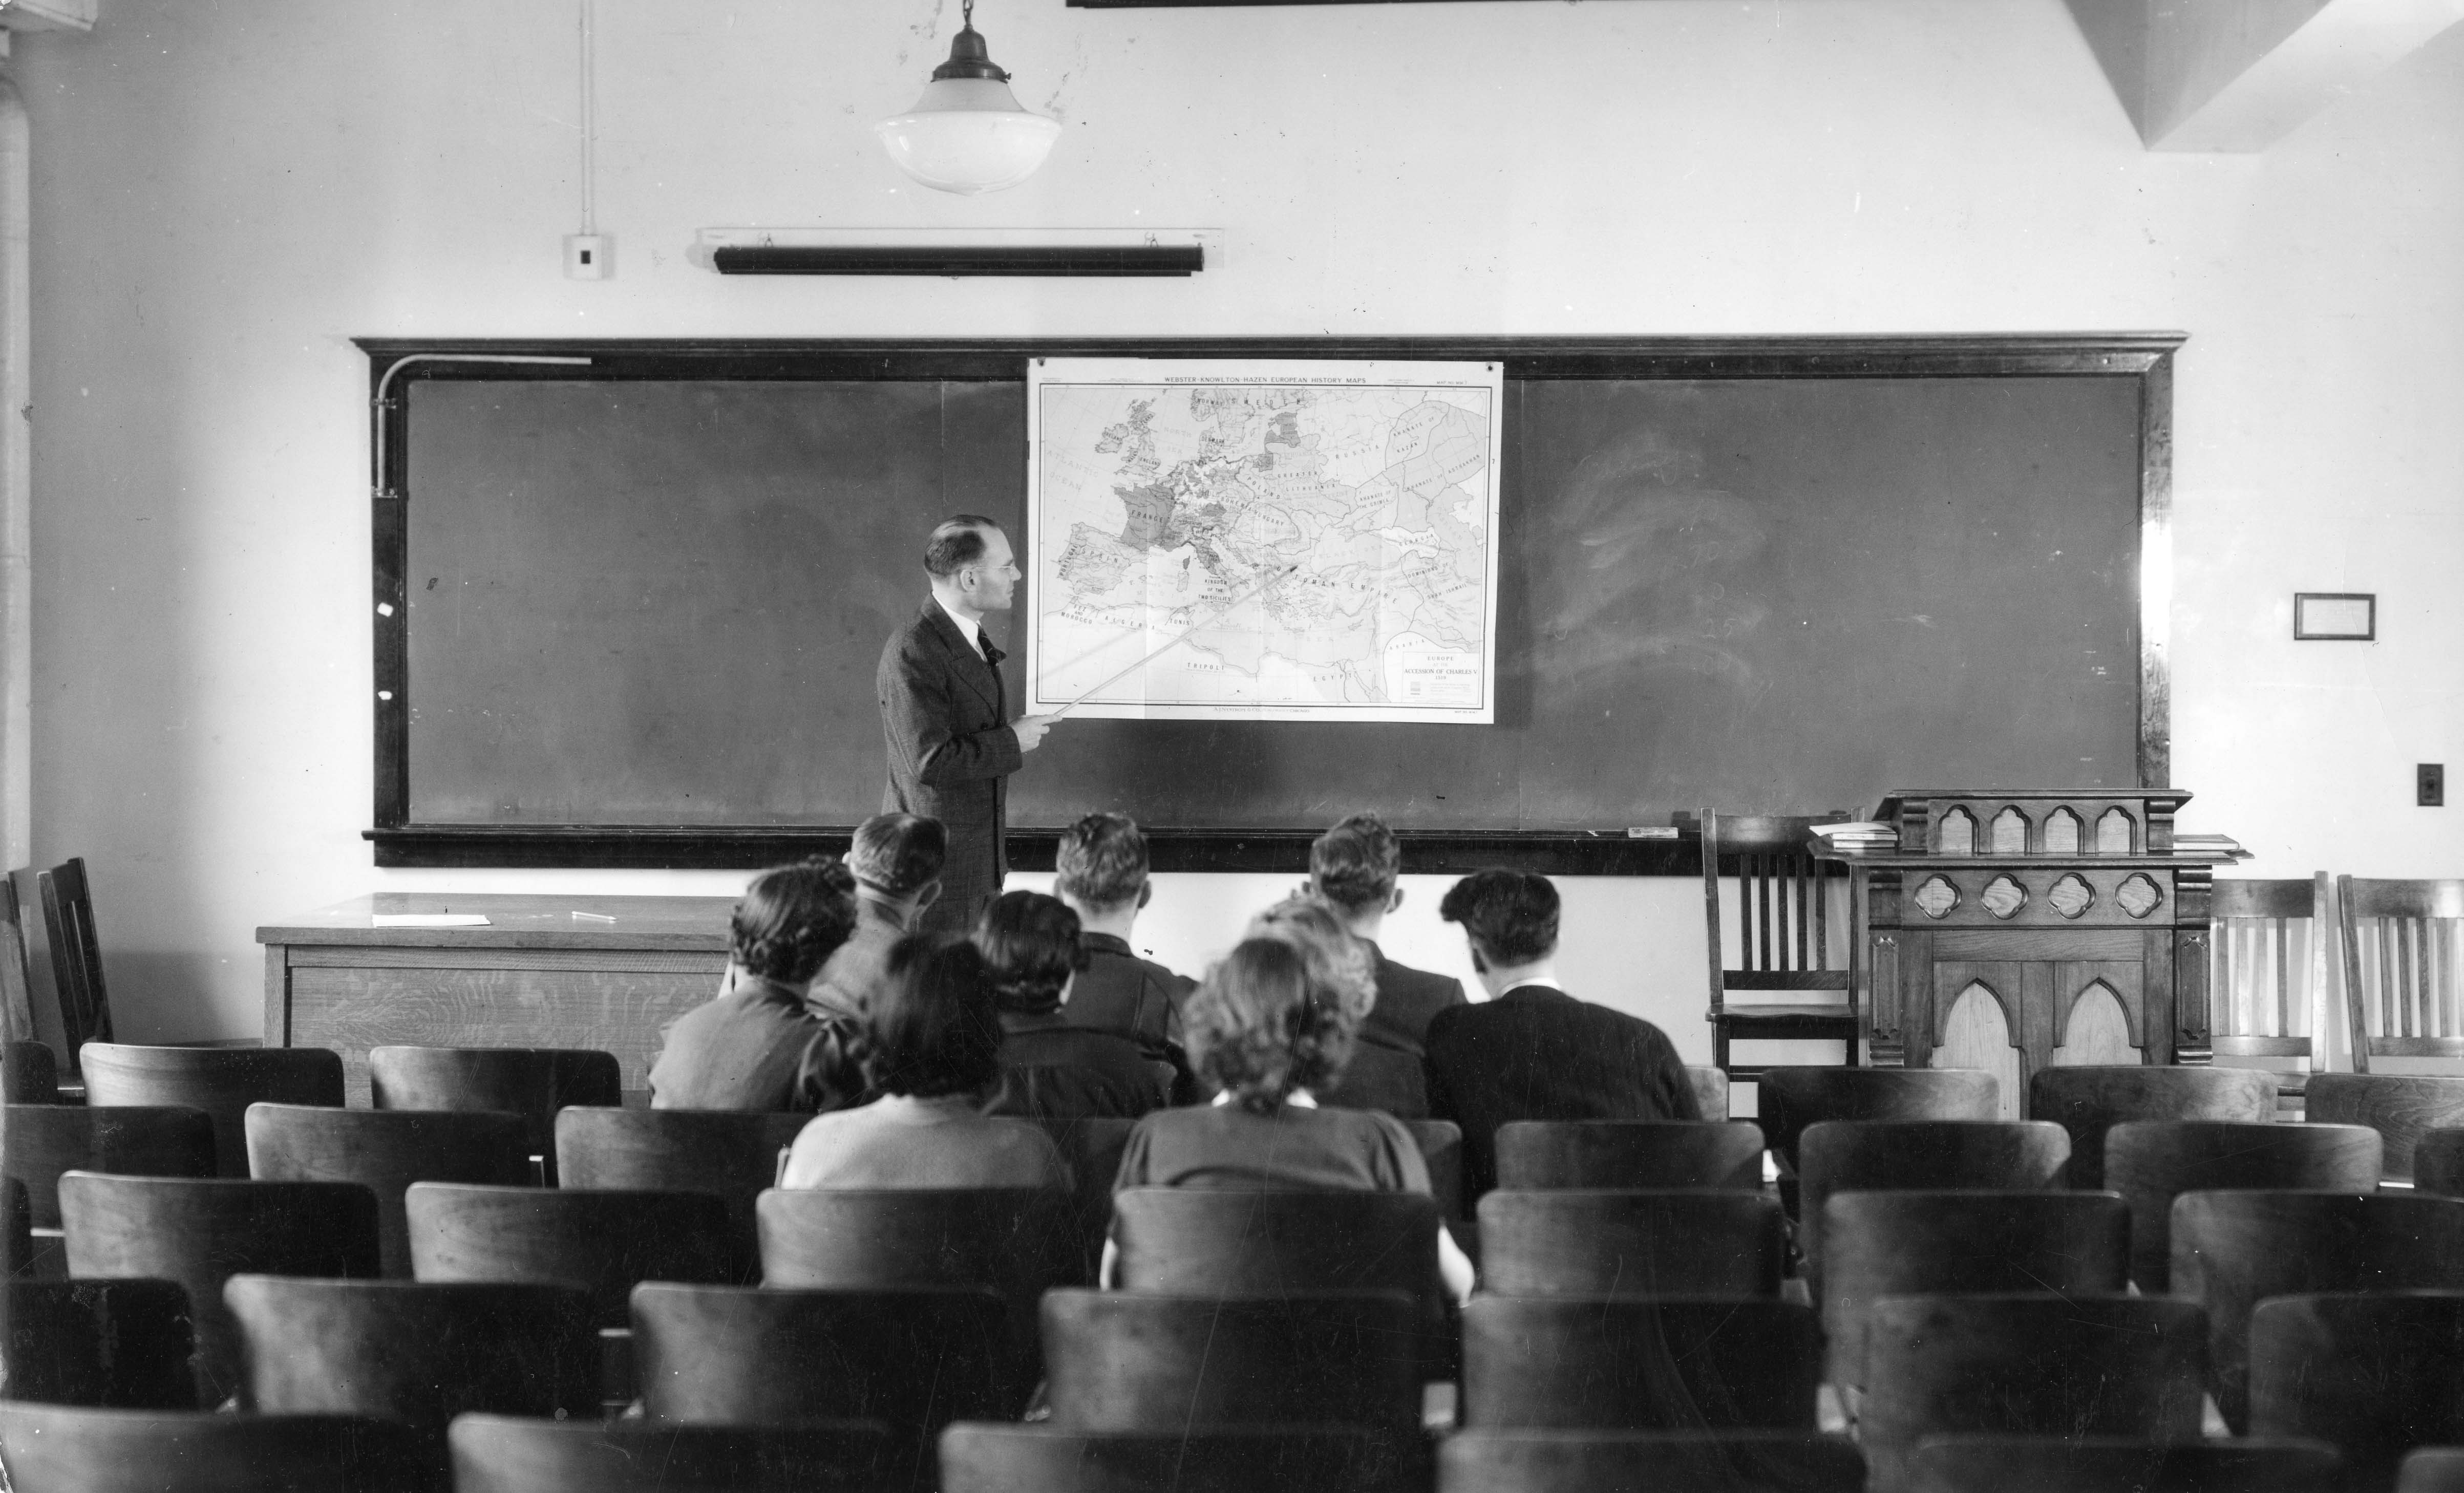 An old Wheaton College classroom with a whiteboard